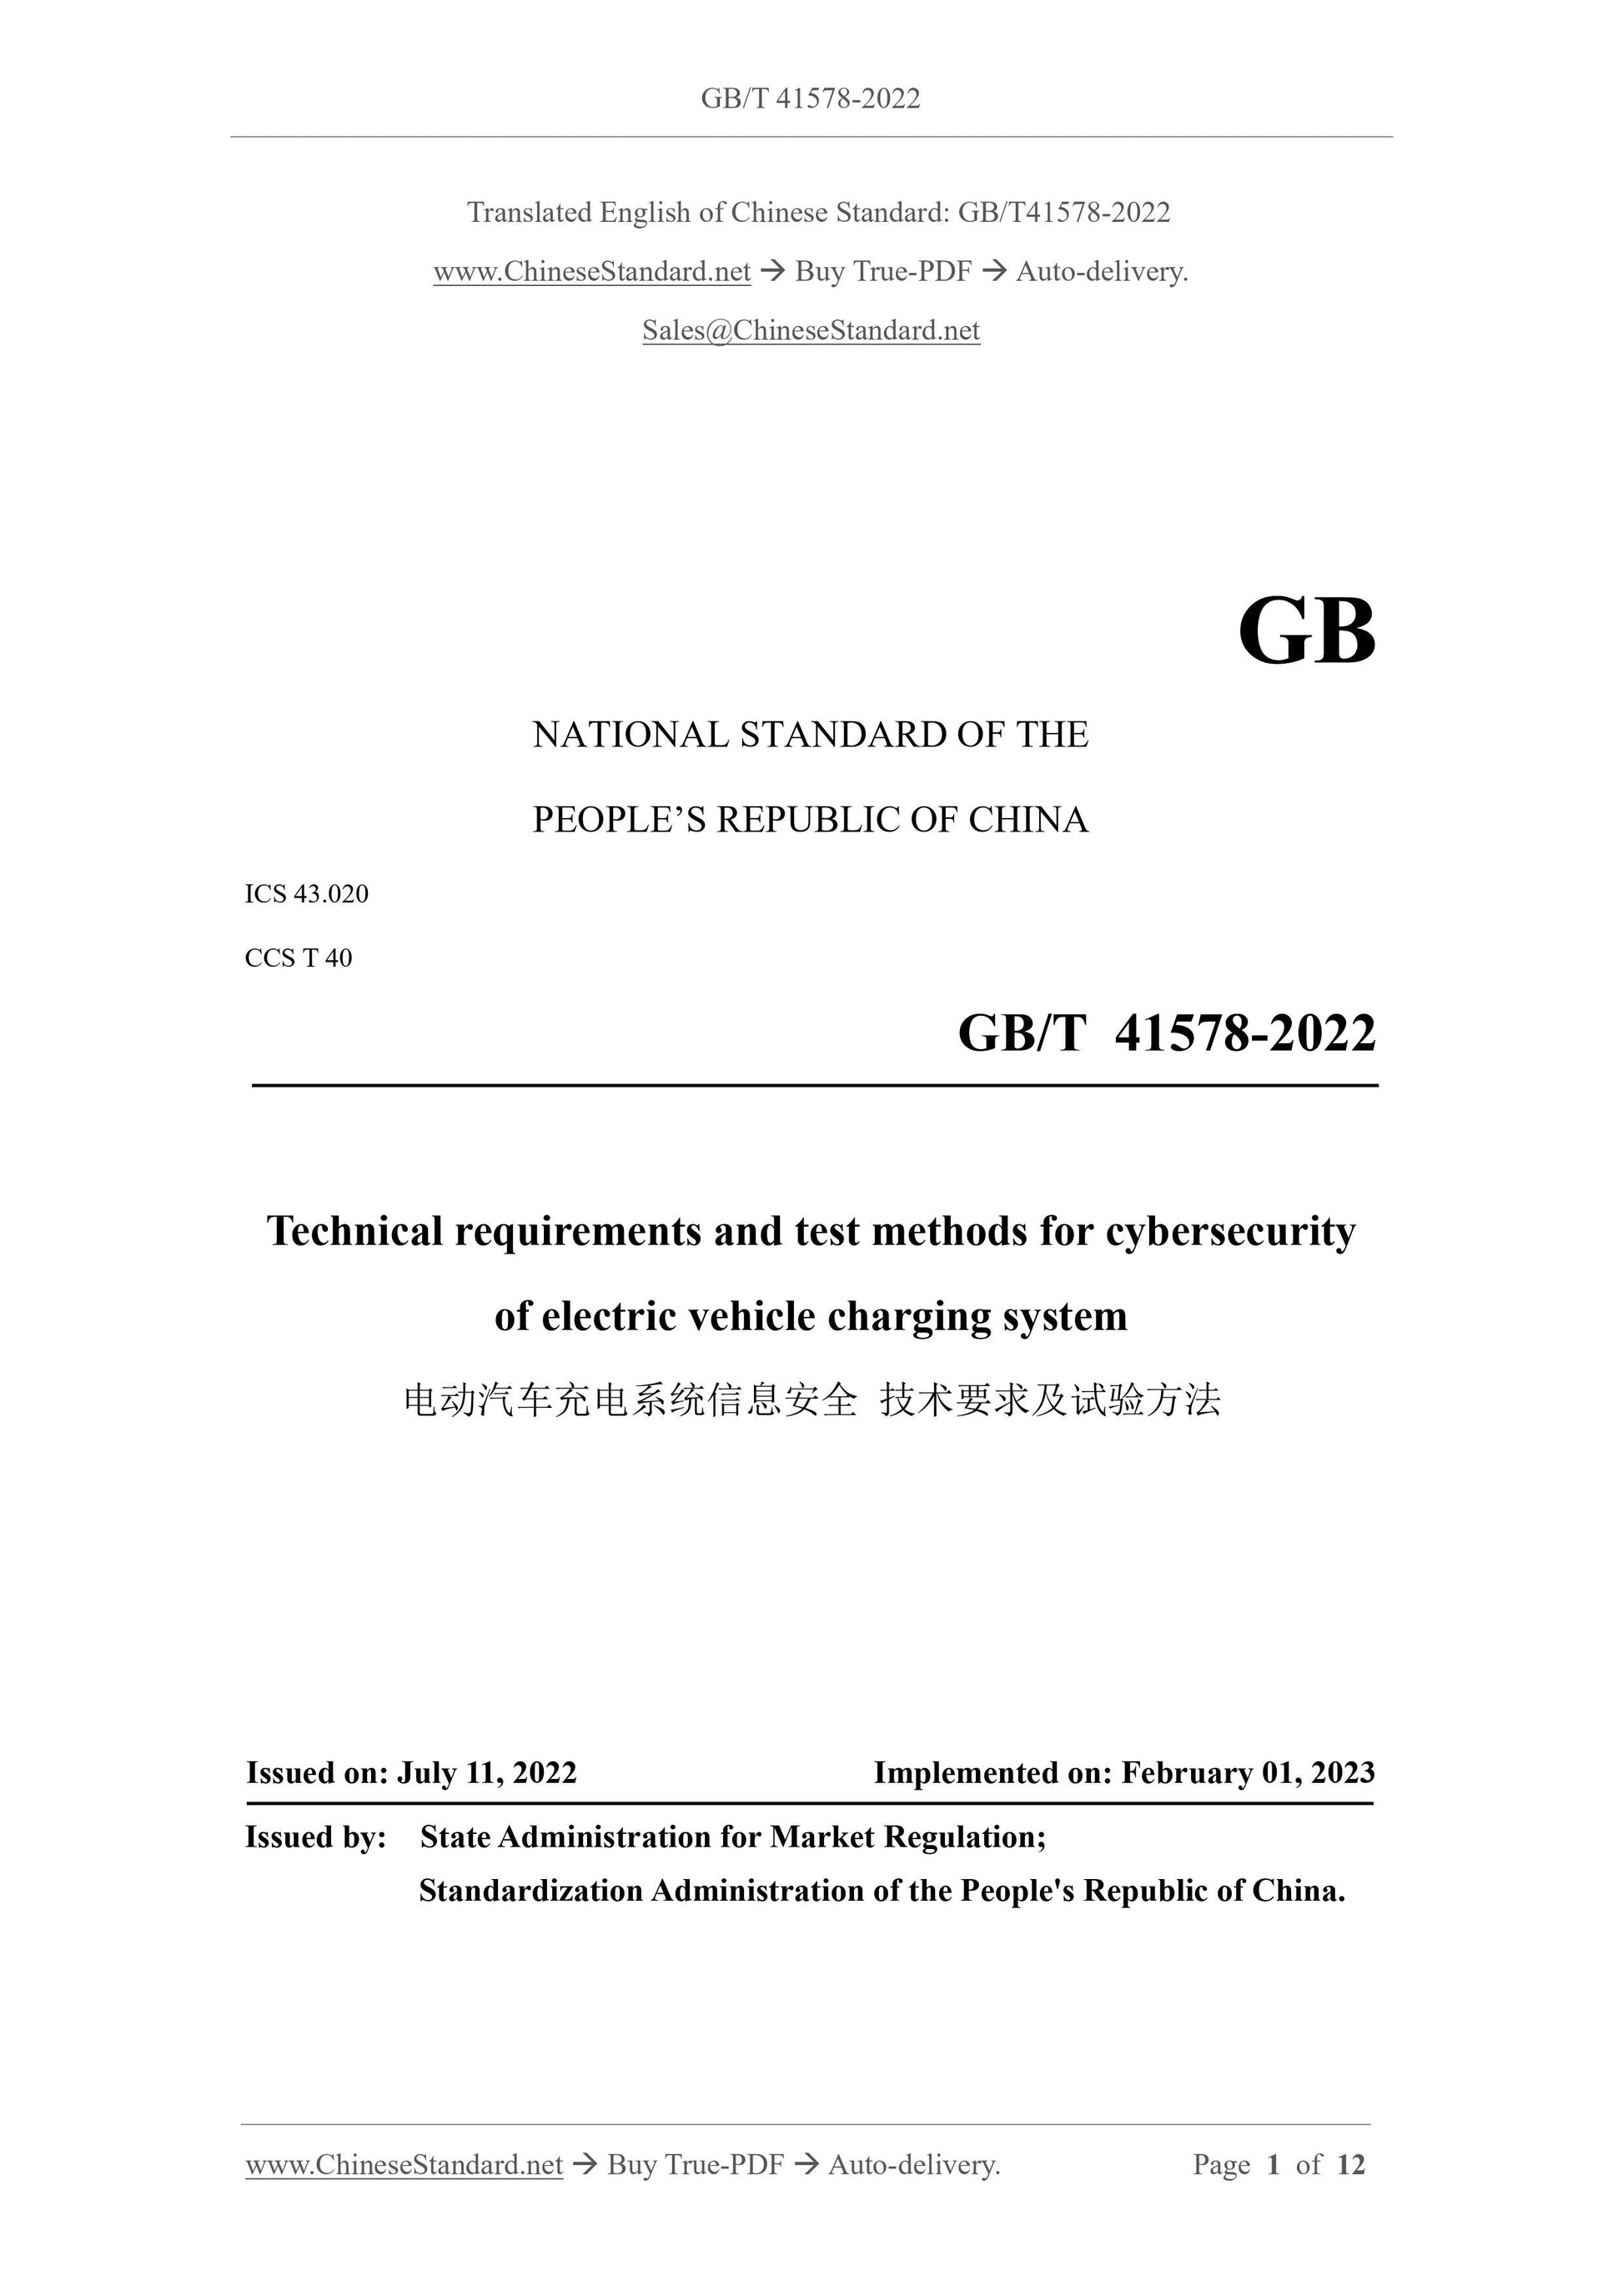 GB/T 41578-2022 Page 1